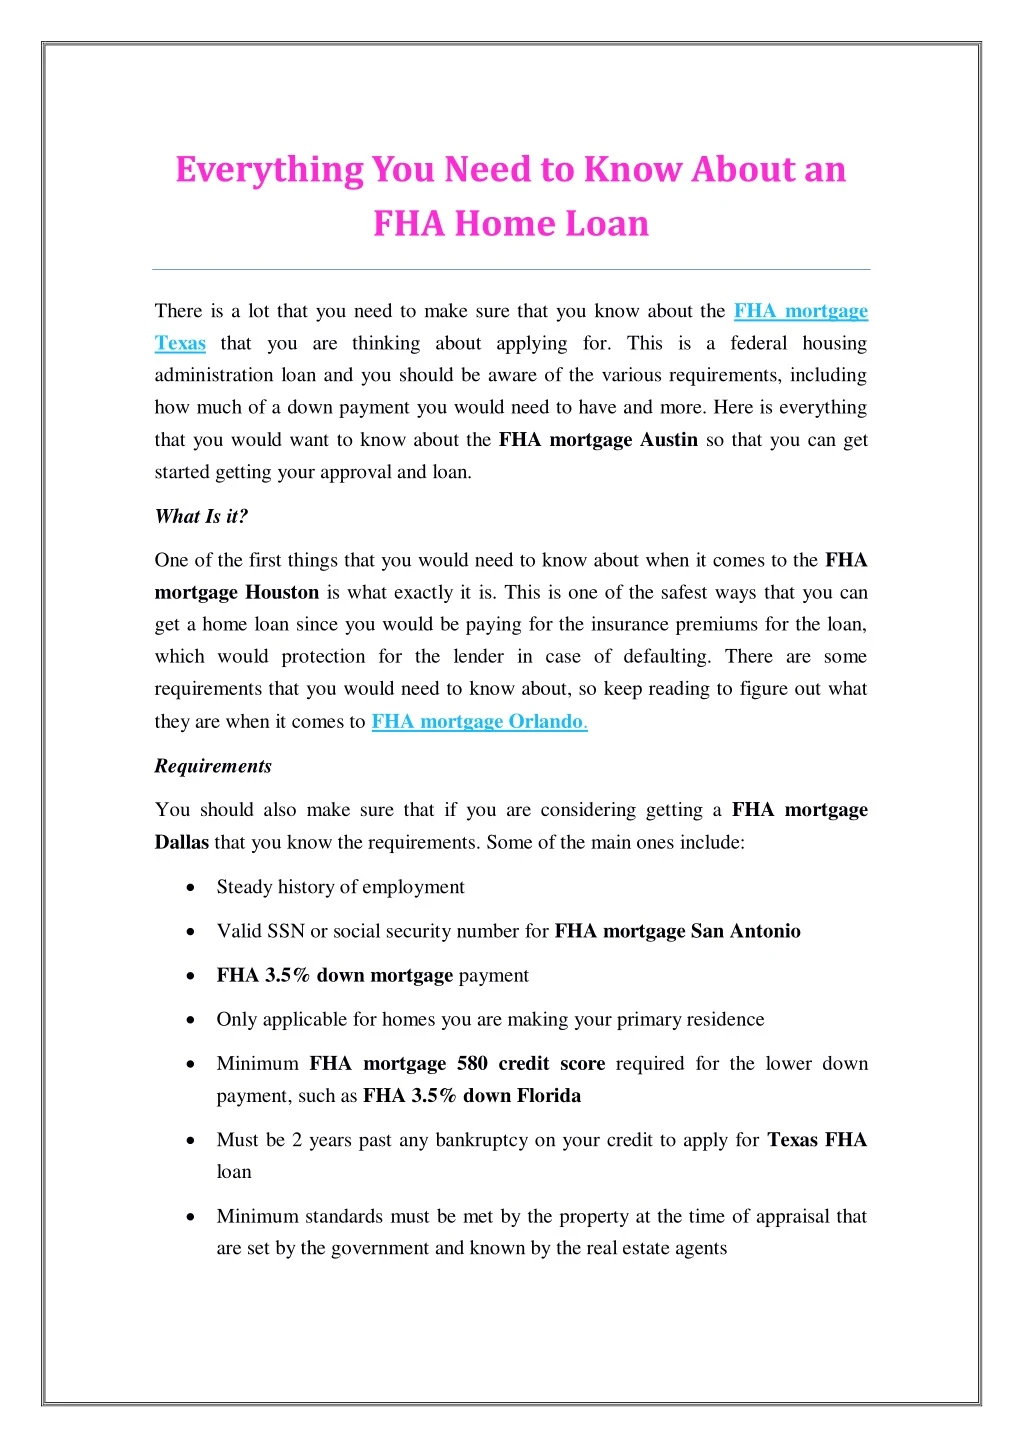 everything you need to know about an fha home loan